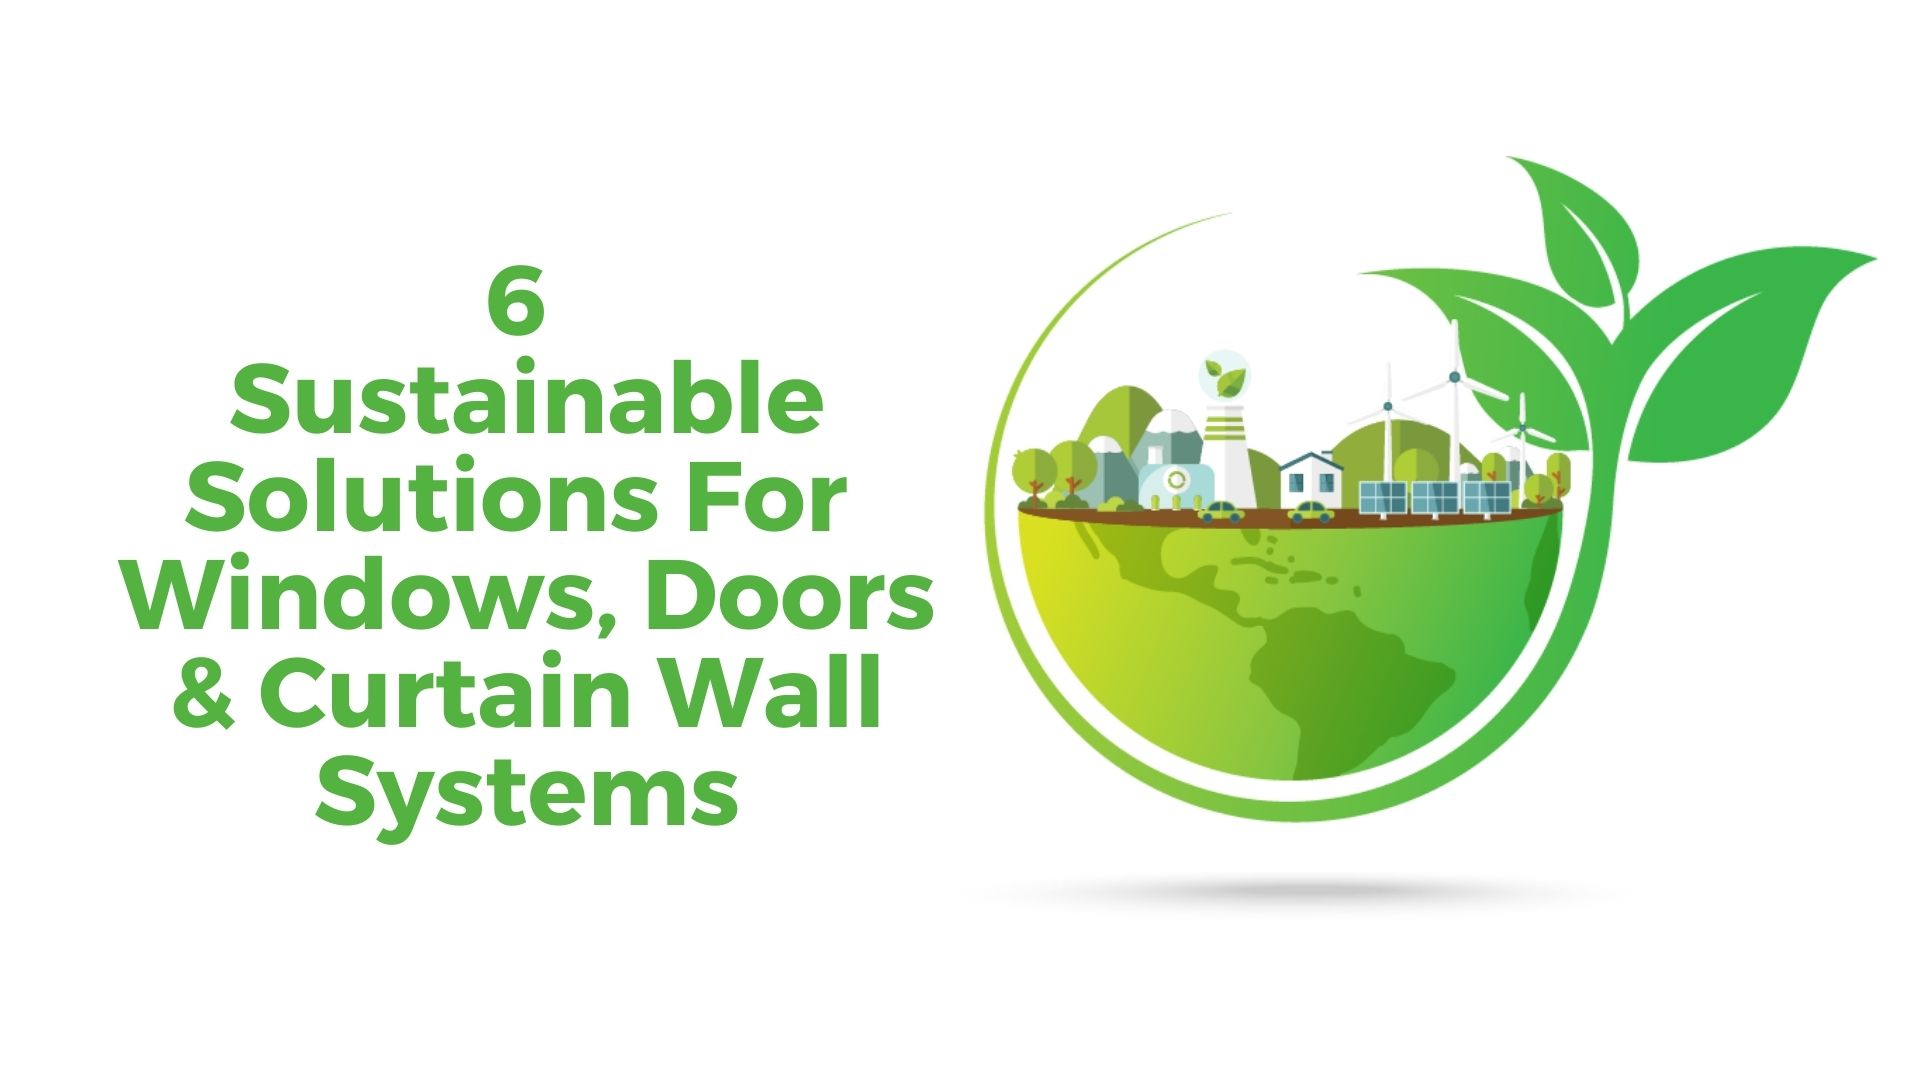 Sustainable Solutions for Windows, Doors, Curtain Wall Systems